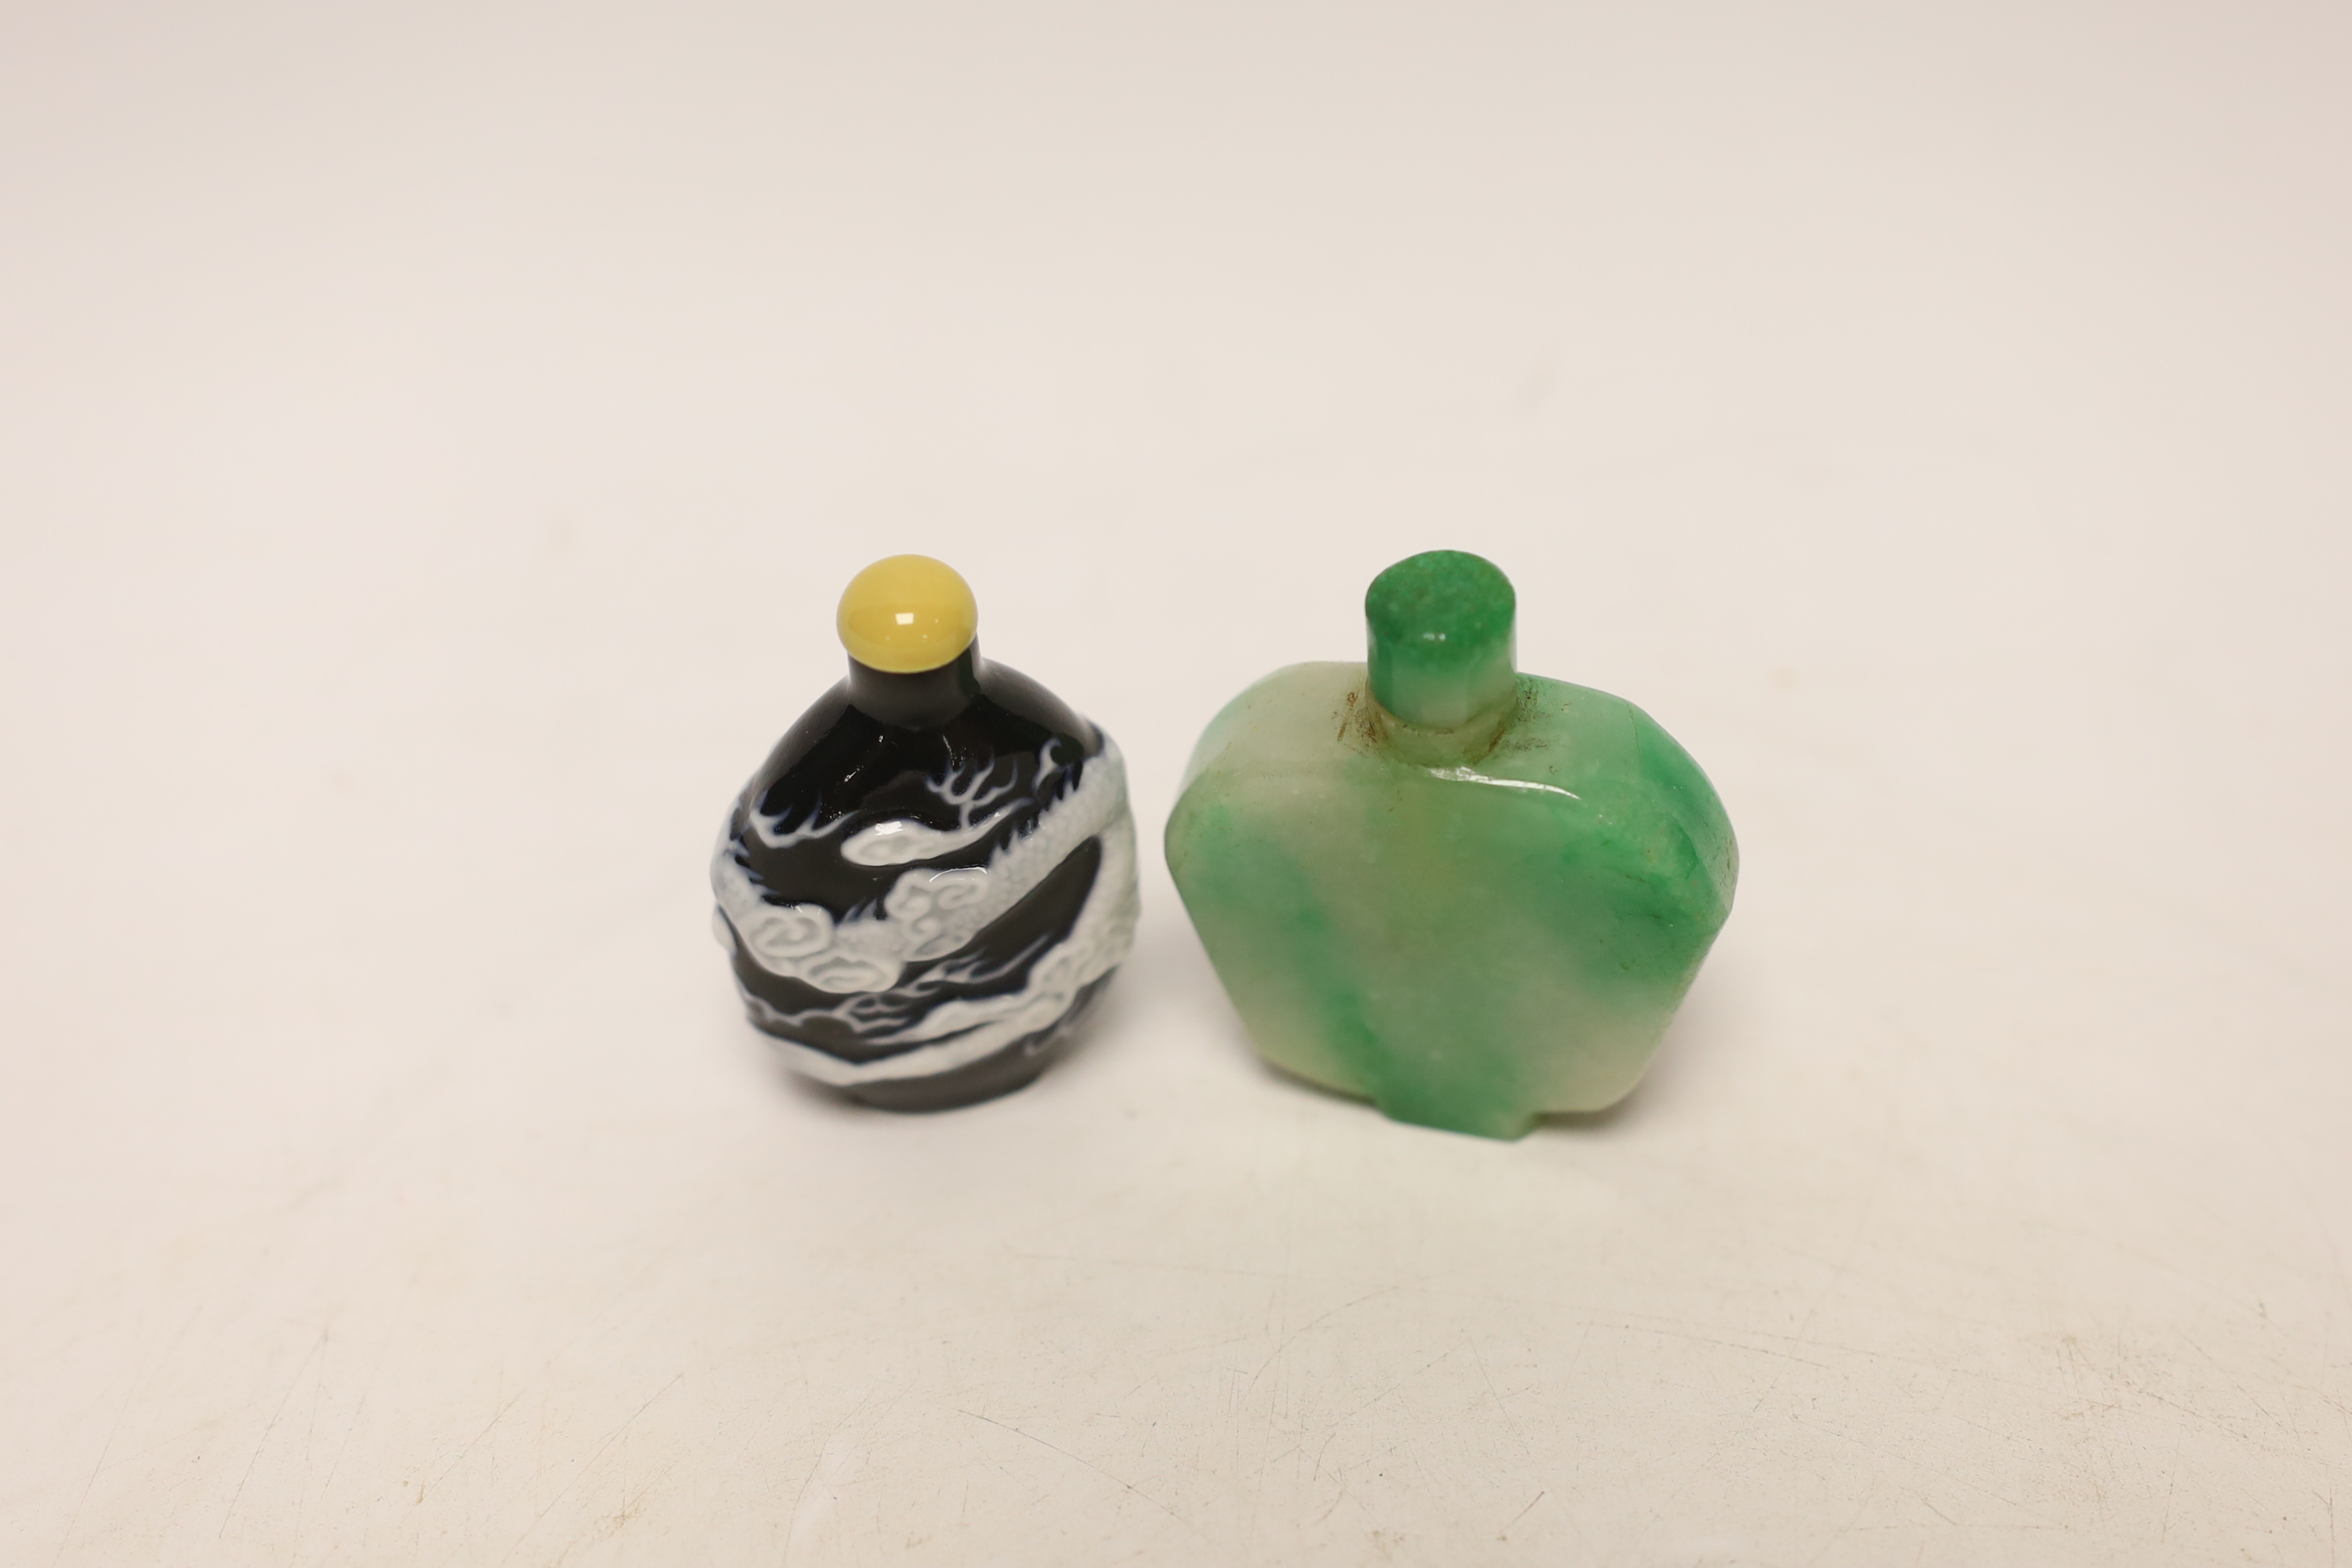 A Chinese jadeite snuff bottle and a slip decorated porcelain ‘dragon’ snuff bottle